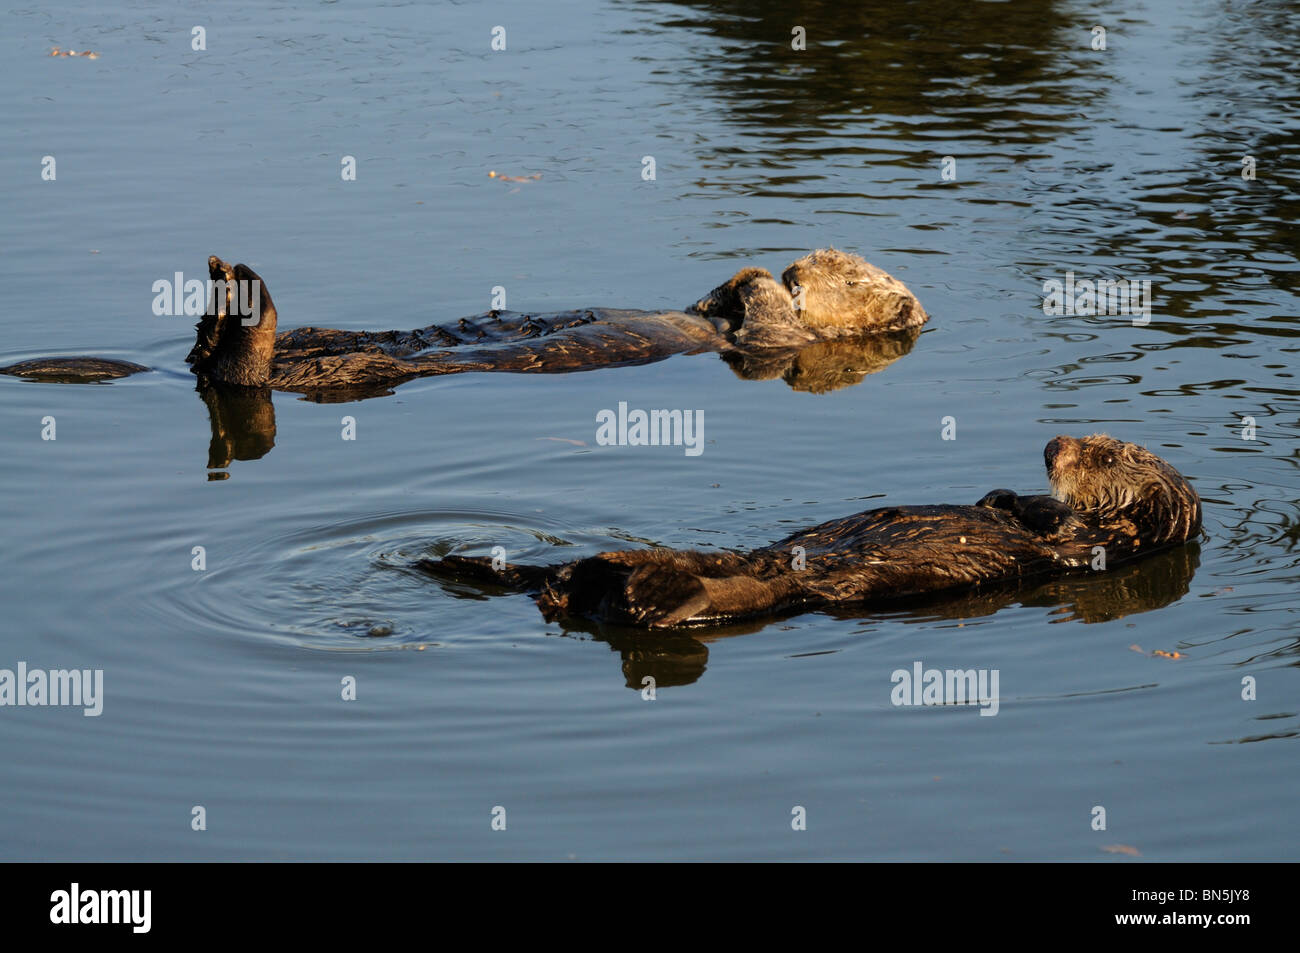 Stock photo of a pair of breeding California sea otters floating together on their backs. Stock Photo